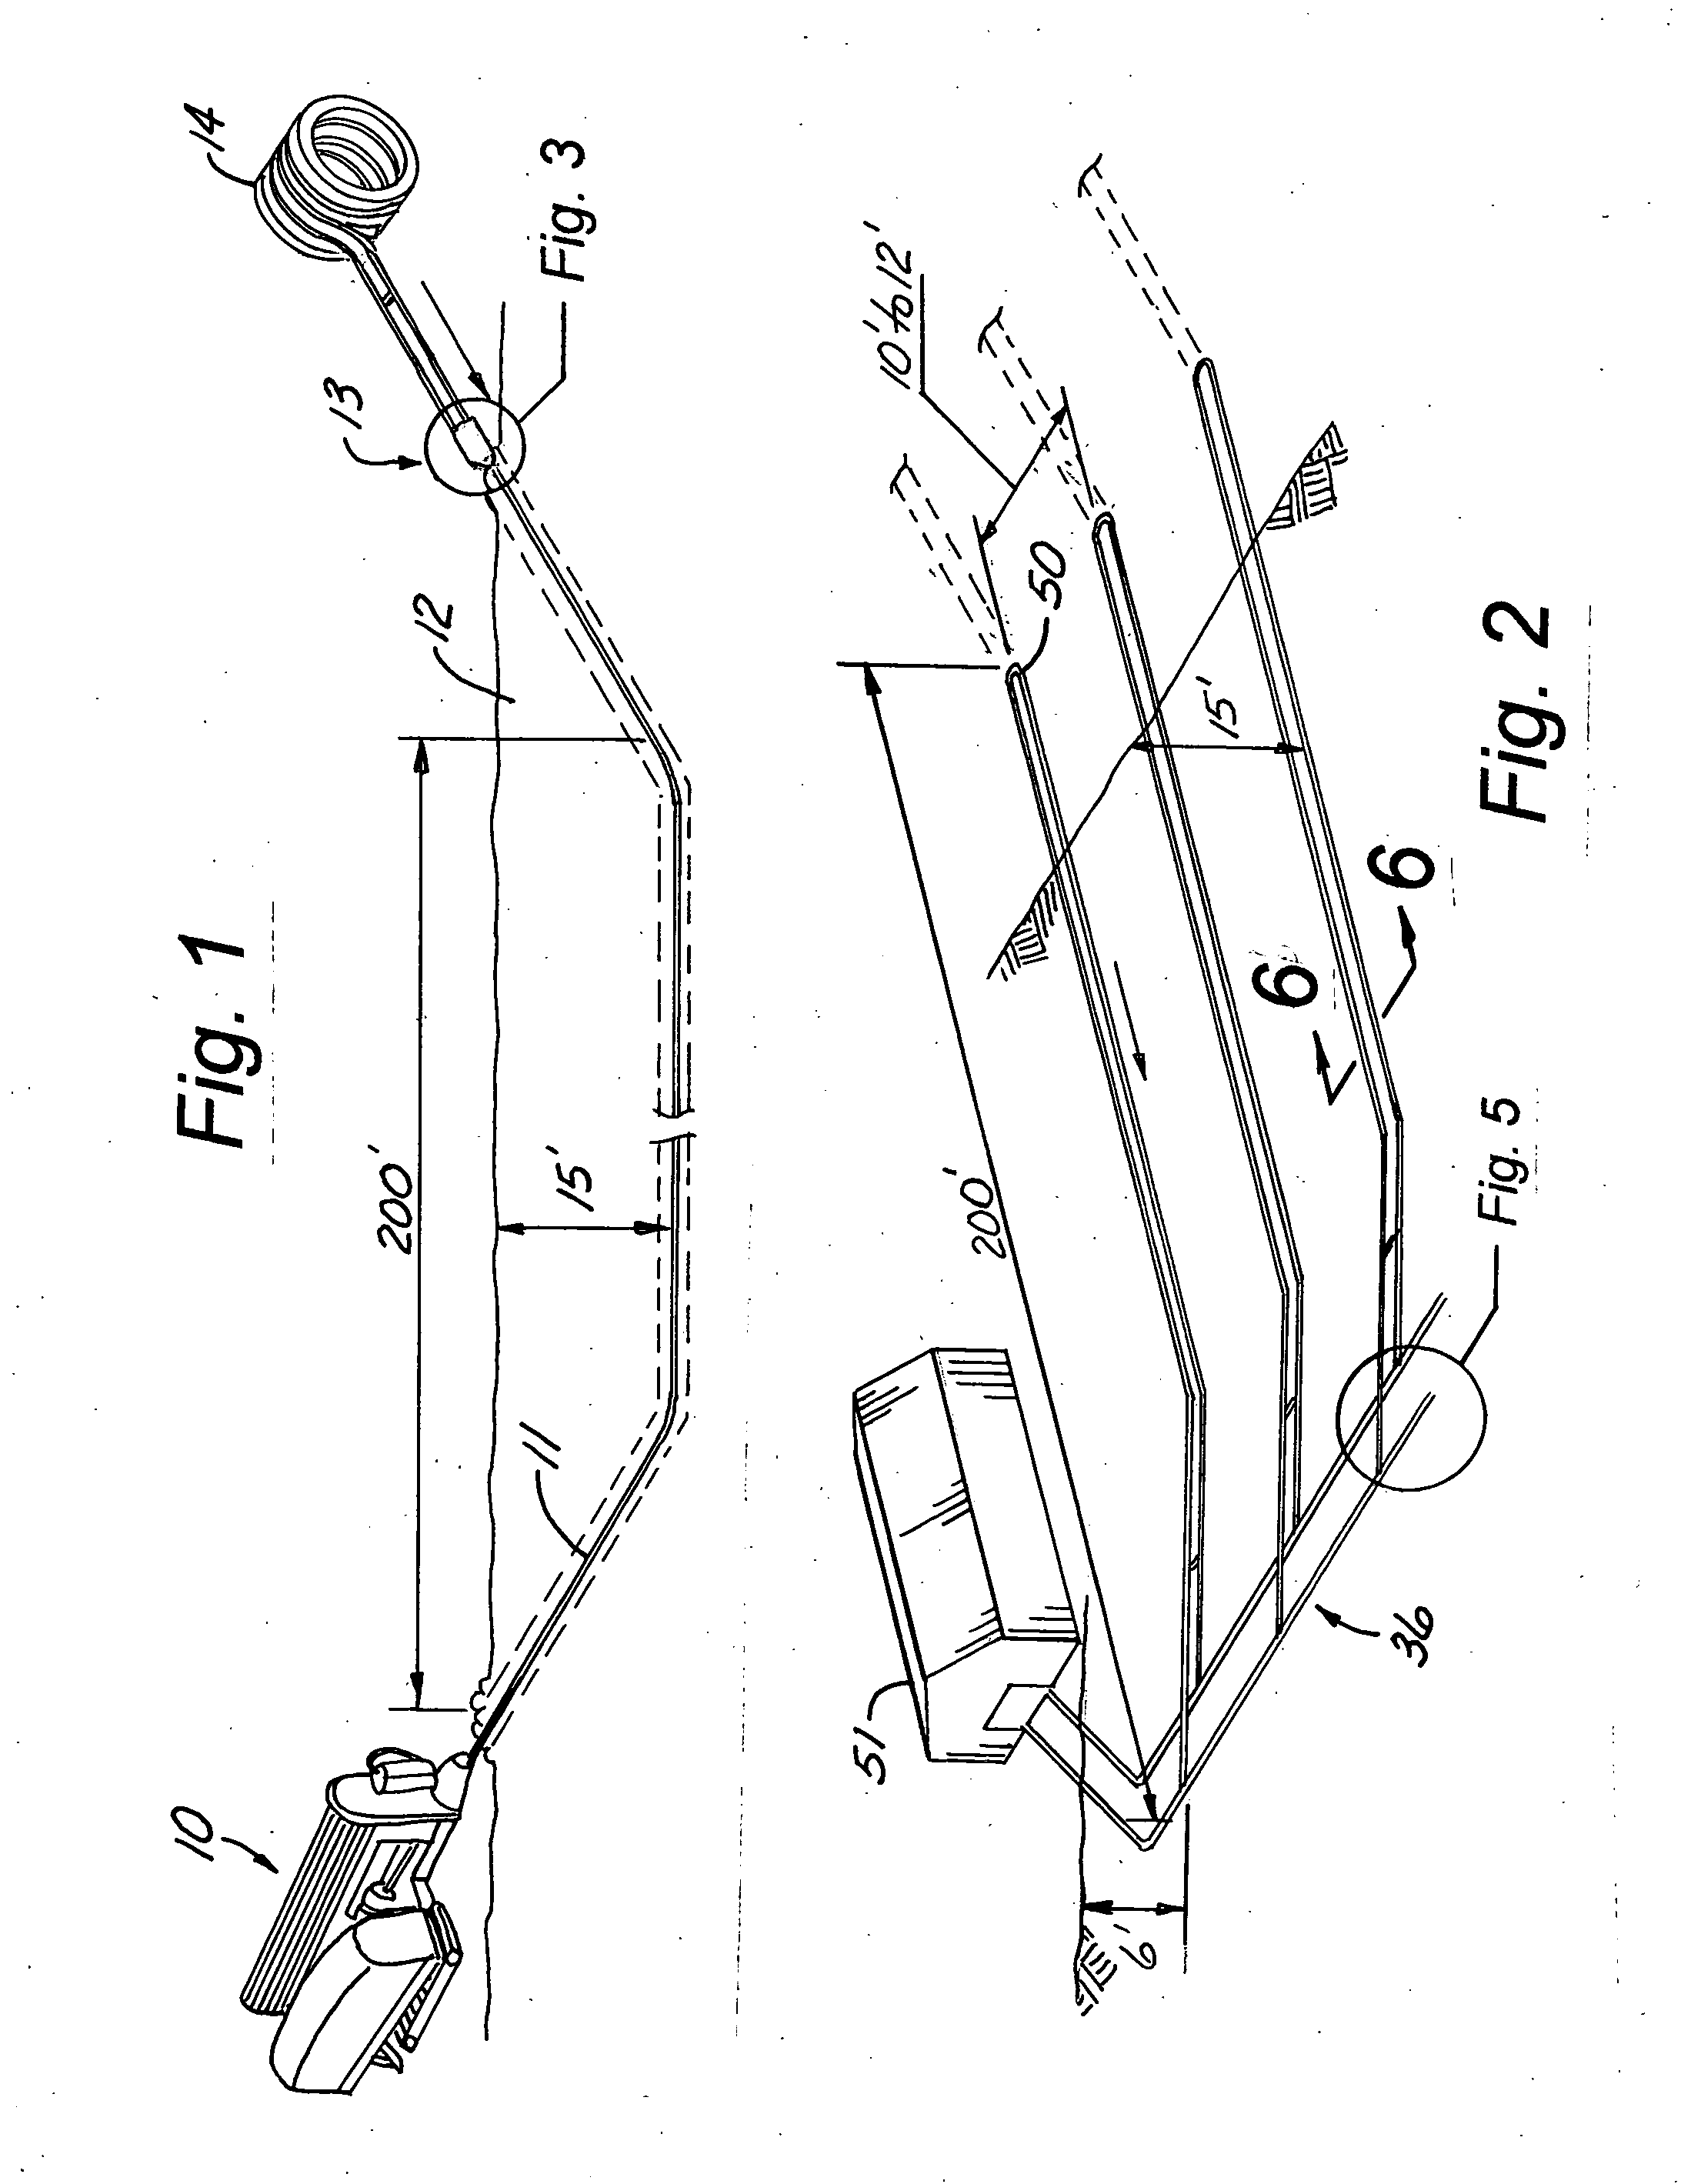 Geothermal heating and/or cooling apparatus and method of using same